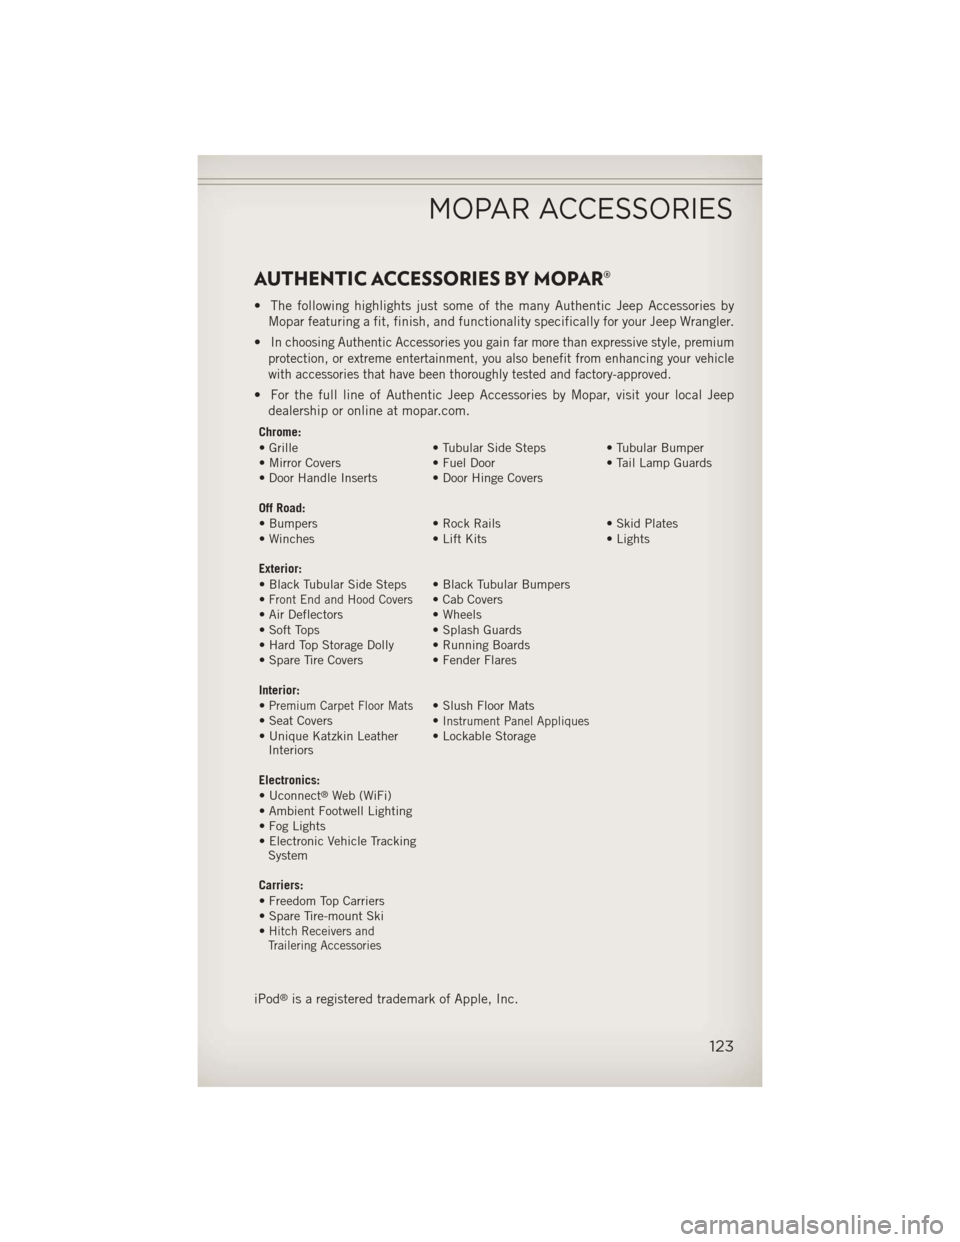 JEEP WRANGLER 2013 JK / 3.G User Guide AUTHENTIC ACCESSORIES BY MOPAR®
• The following highlights just some of the many Authentic Jeep Accessories byMopar featuring a fit, finish, and functionality specifically for your Jeep Wrangler.
�